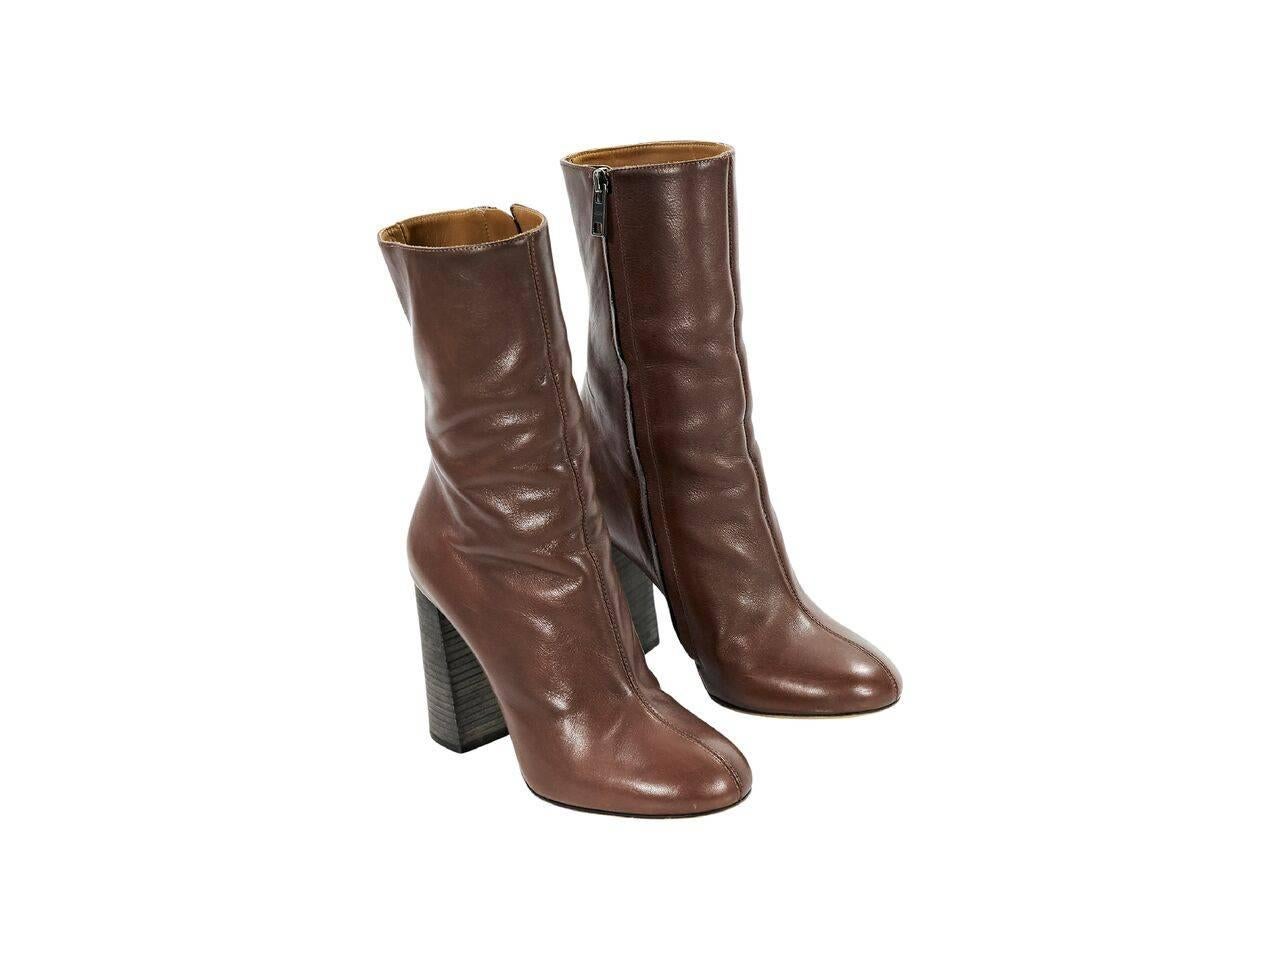 Product details:  Brown leather mid-calf boots by Chloe.  Inner zip closure.  Chunky stacked heel.  Round toe.  
Condition: Pre-owned. Very good.
Est. Retail $ 898.00